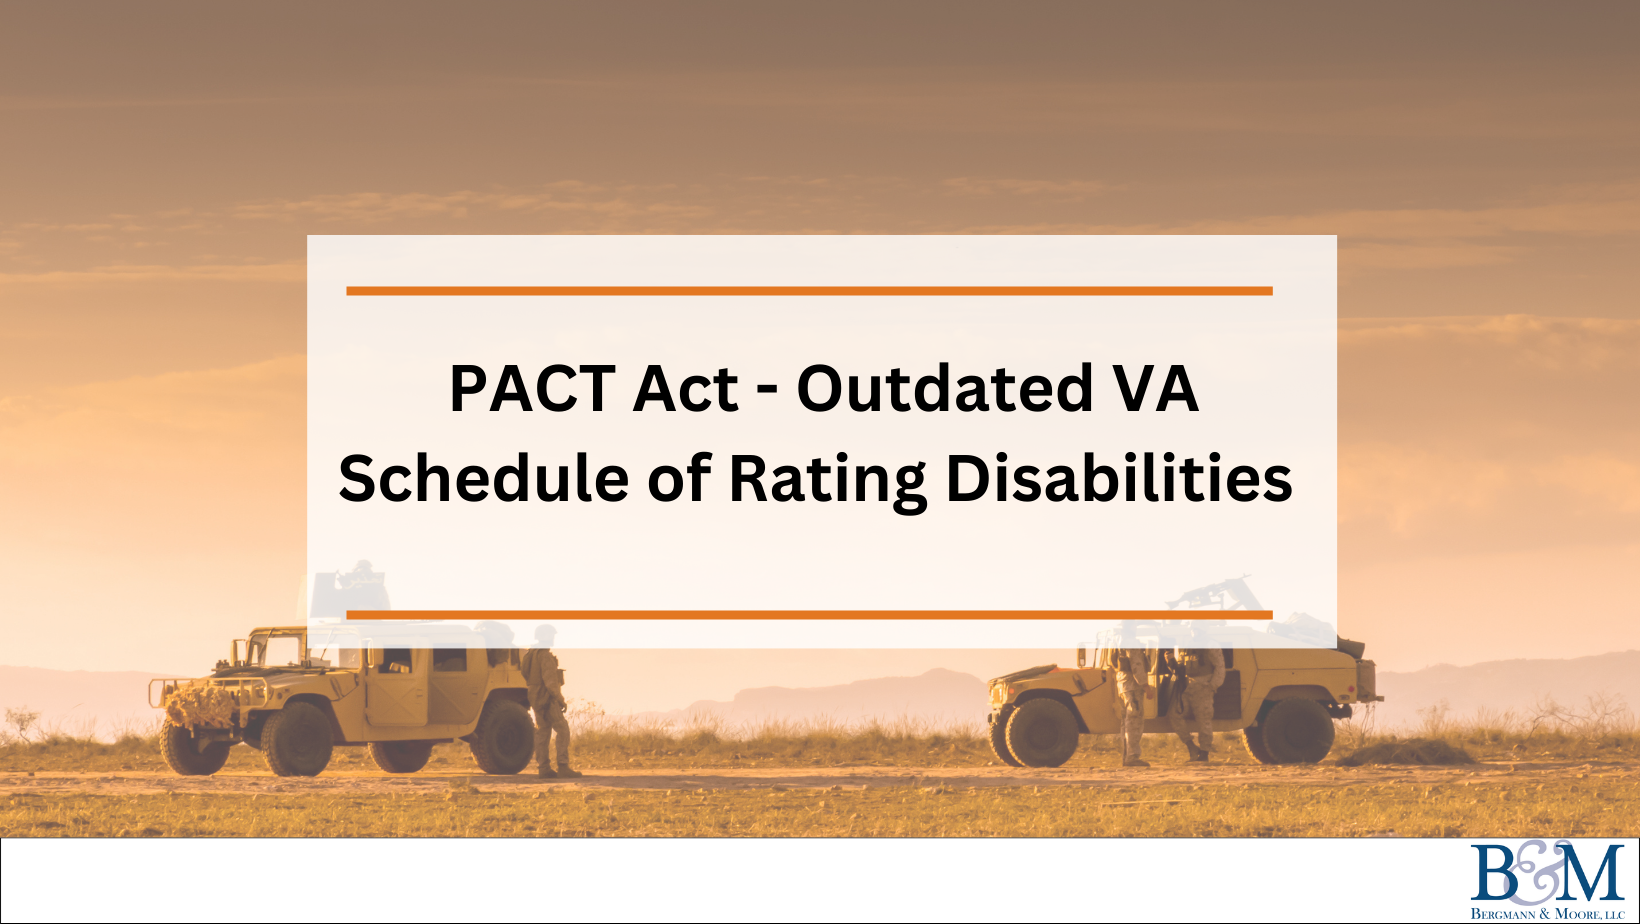 PACT Act - Outdated VA Schedule of Rating Disabilities